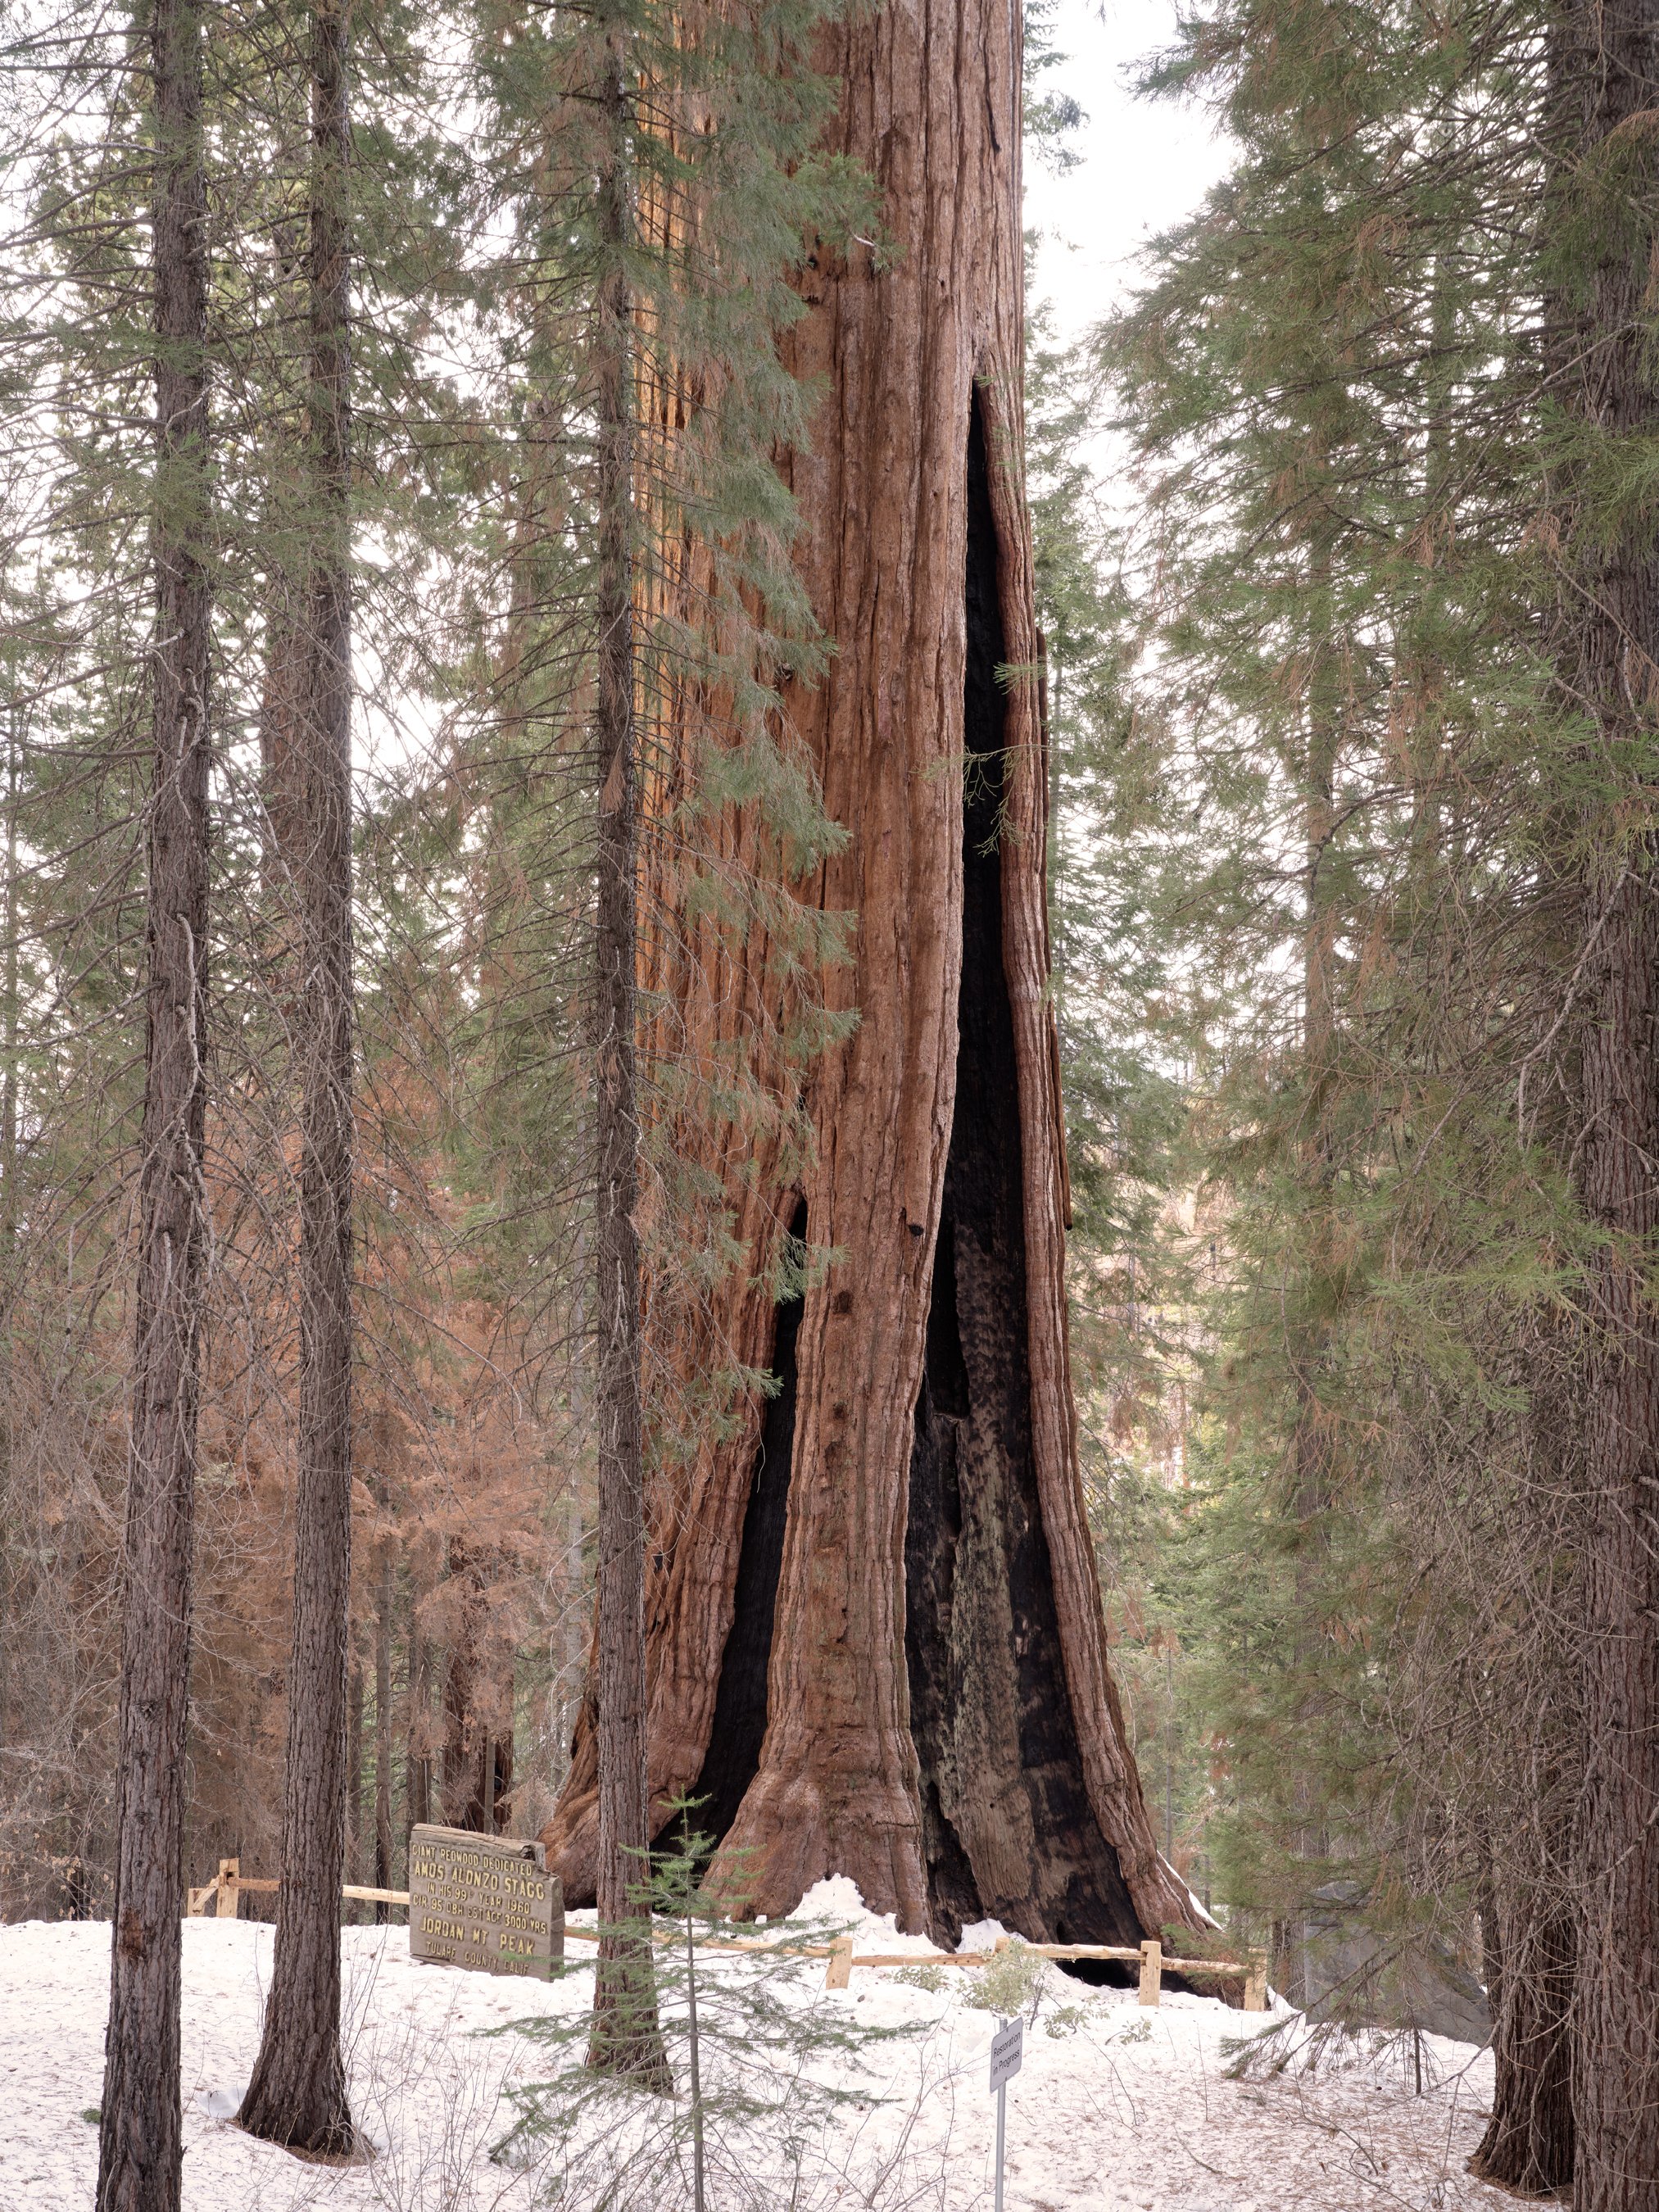 gathering_growth_foundation_stagg_tree_giant_sequoia_brian_kelley_02-2022_07.jpg